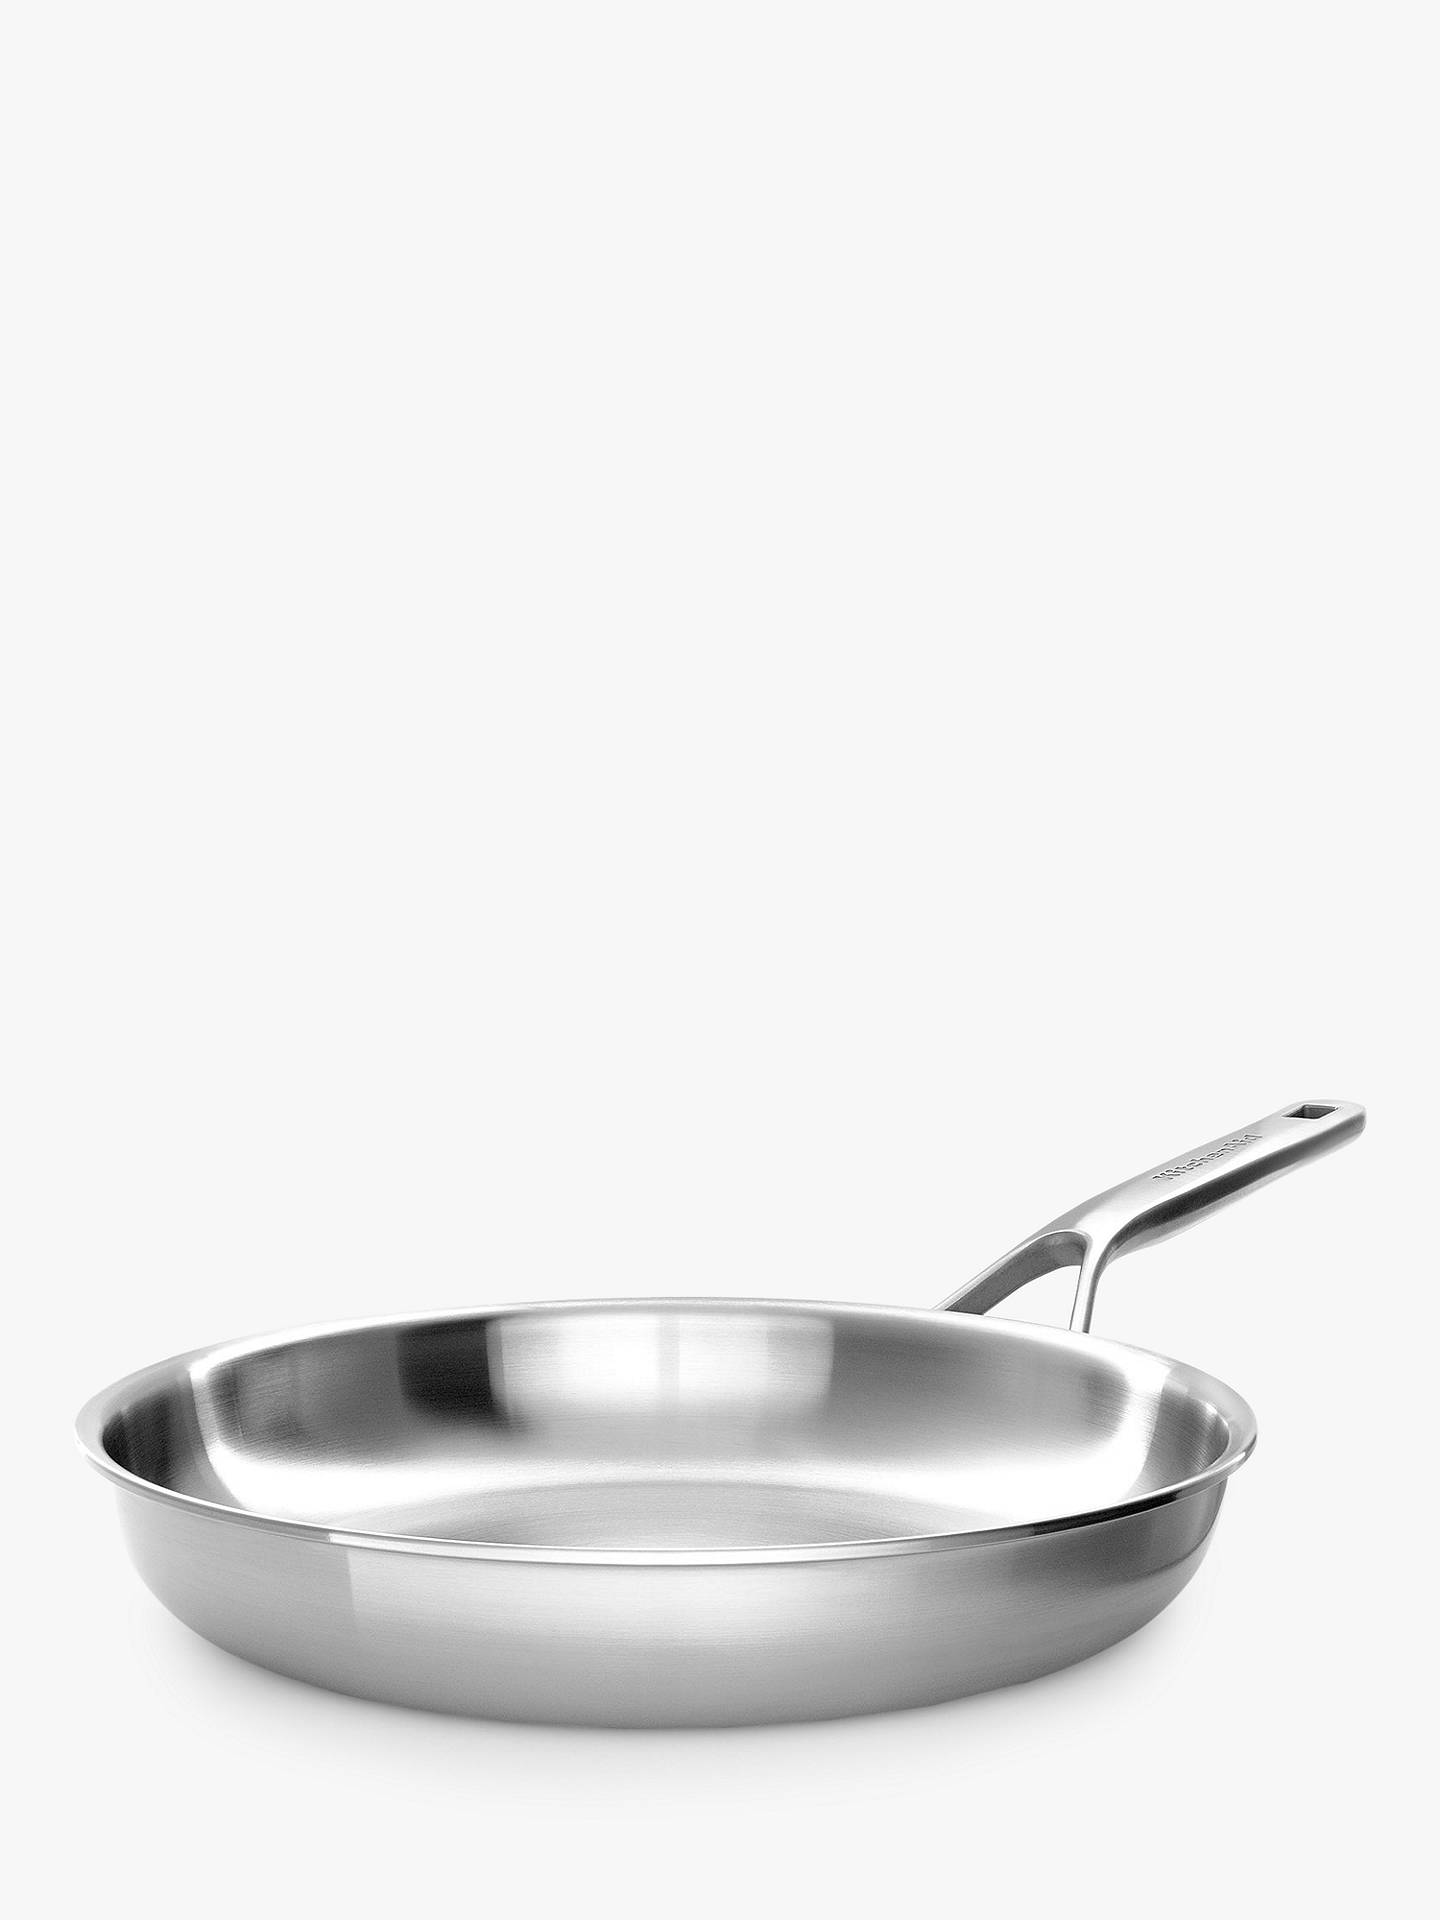 KitchenAid Multi-Ply Stainless Steel Uncoated Frying Pan, 28cm at John Kitchenaid Stainless Steel Frying Pan